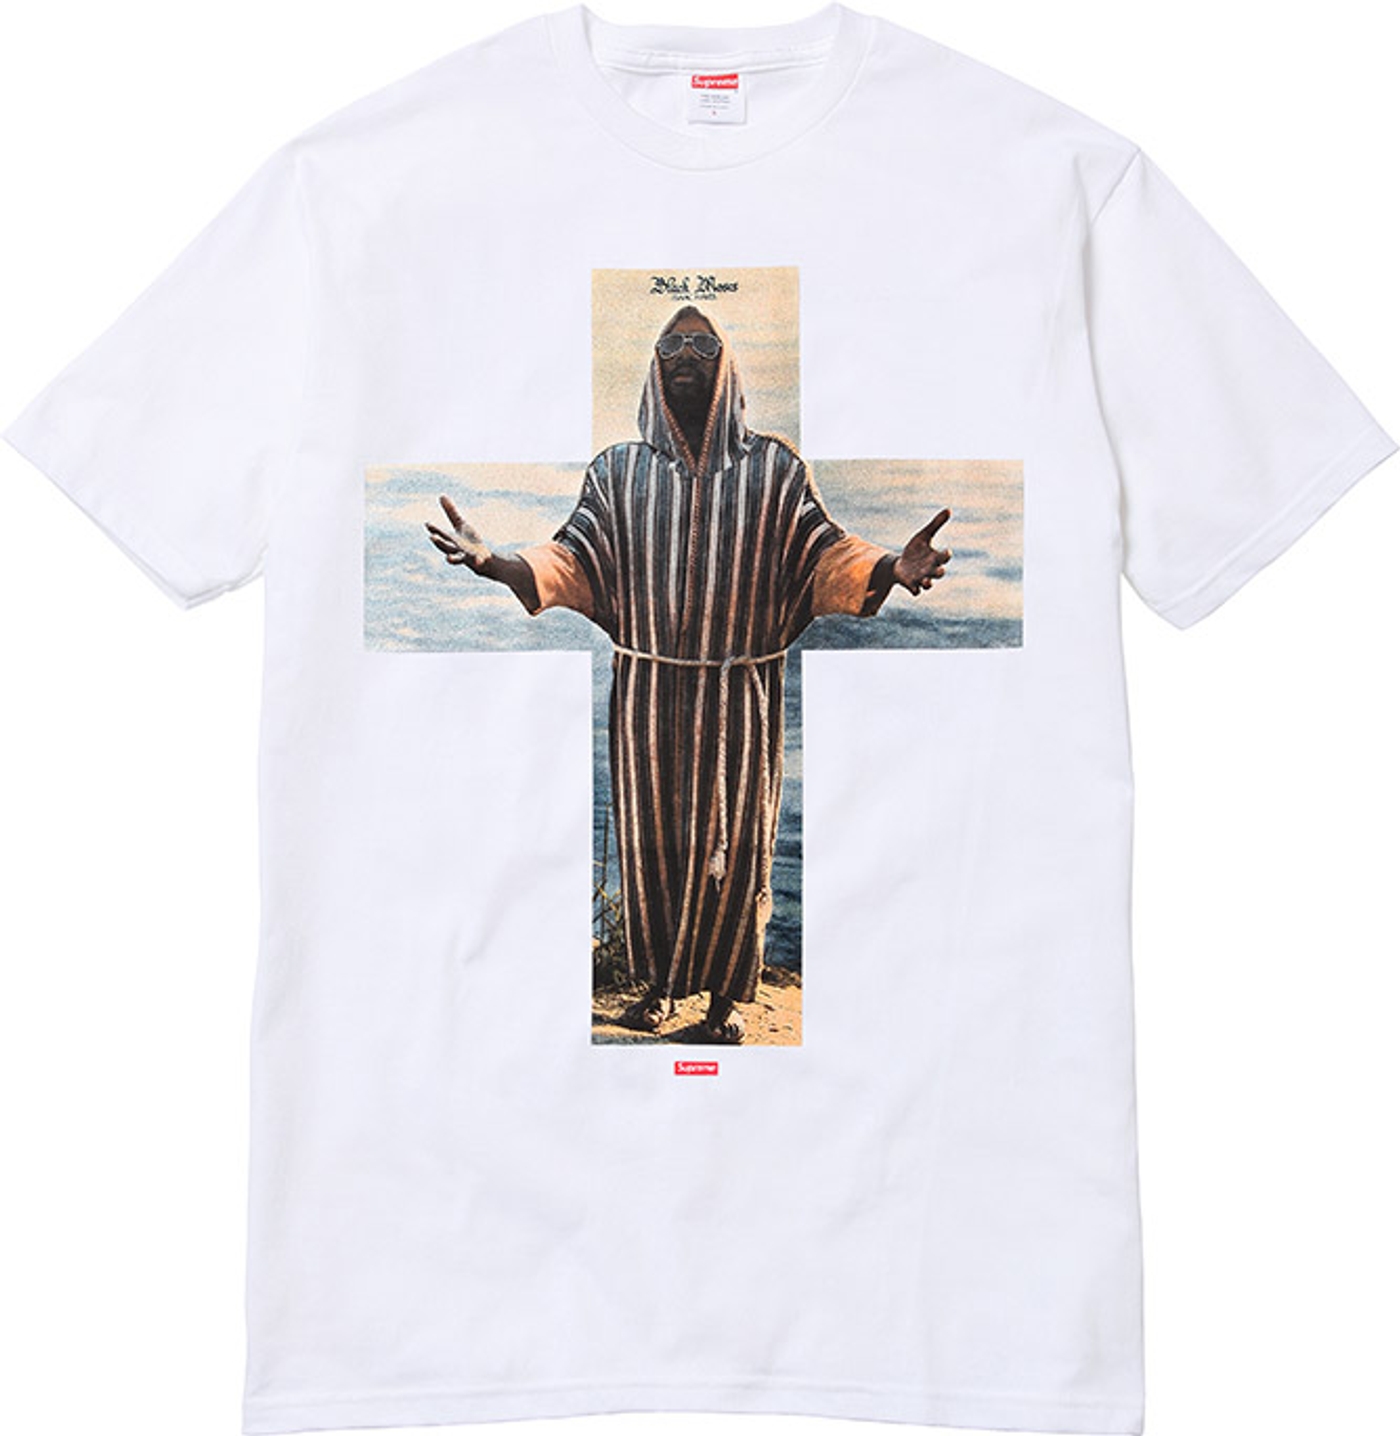 Black Moses Tee 
All cotton classic Supreme t-shirt (1/5)